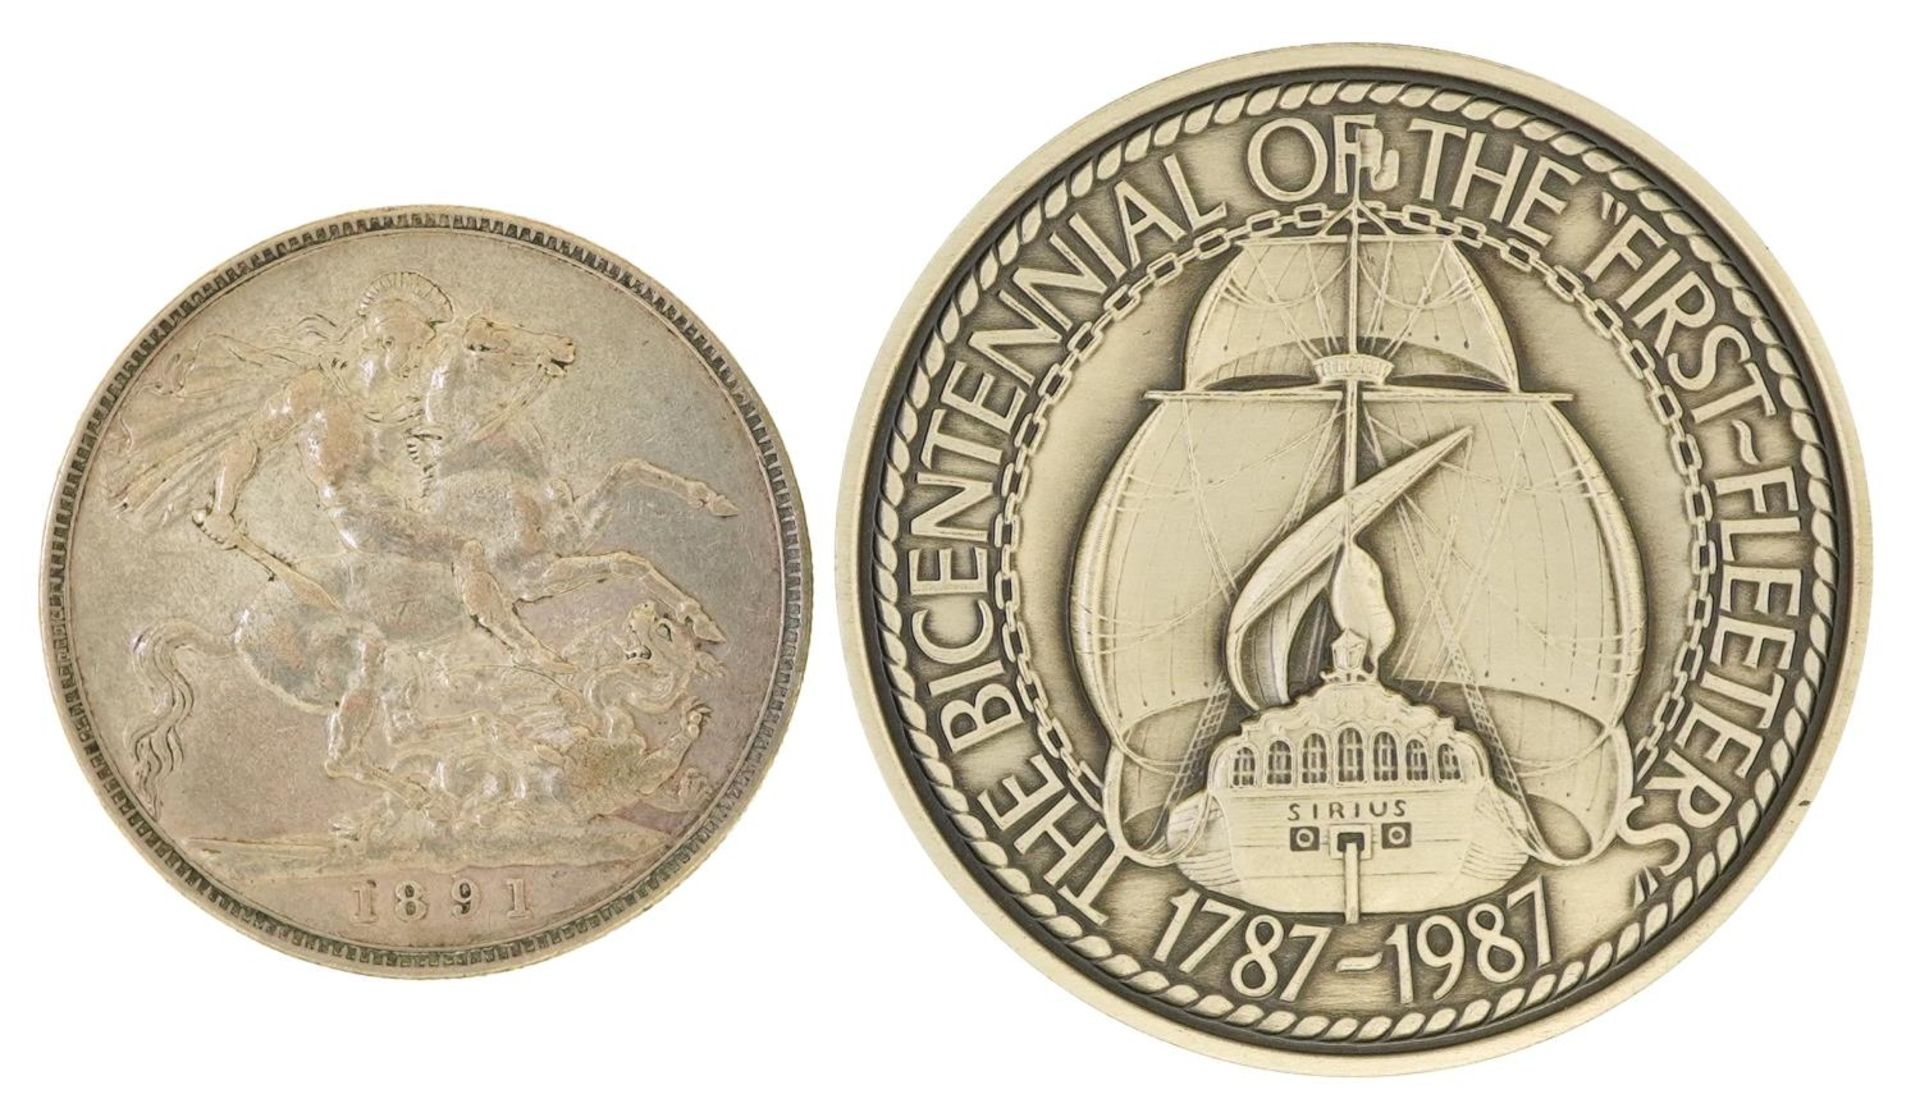 Queen Victoria 1891 silver crown and a silver medallion commemorating the Bicentennial of the - Bild 2 aus 6